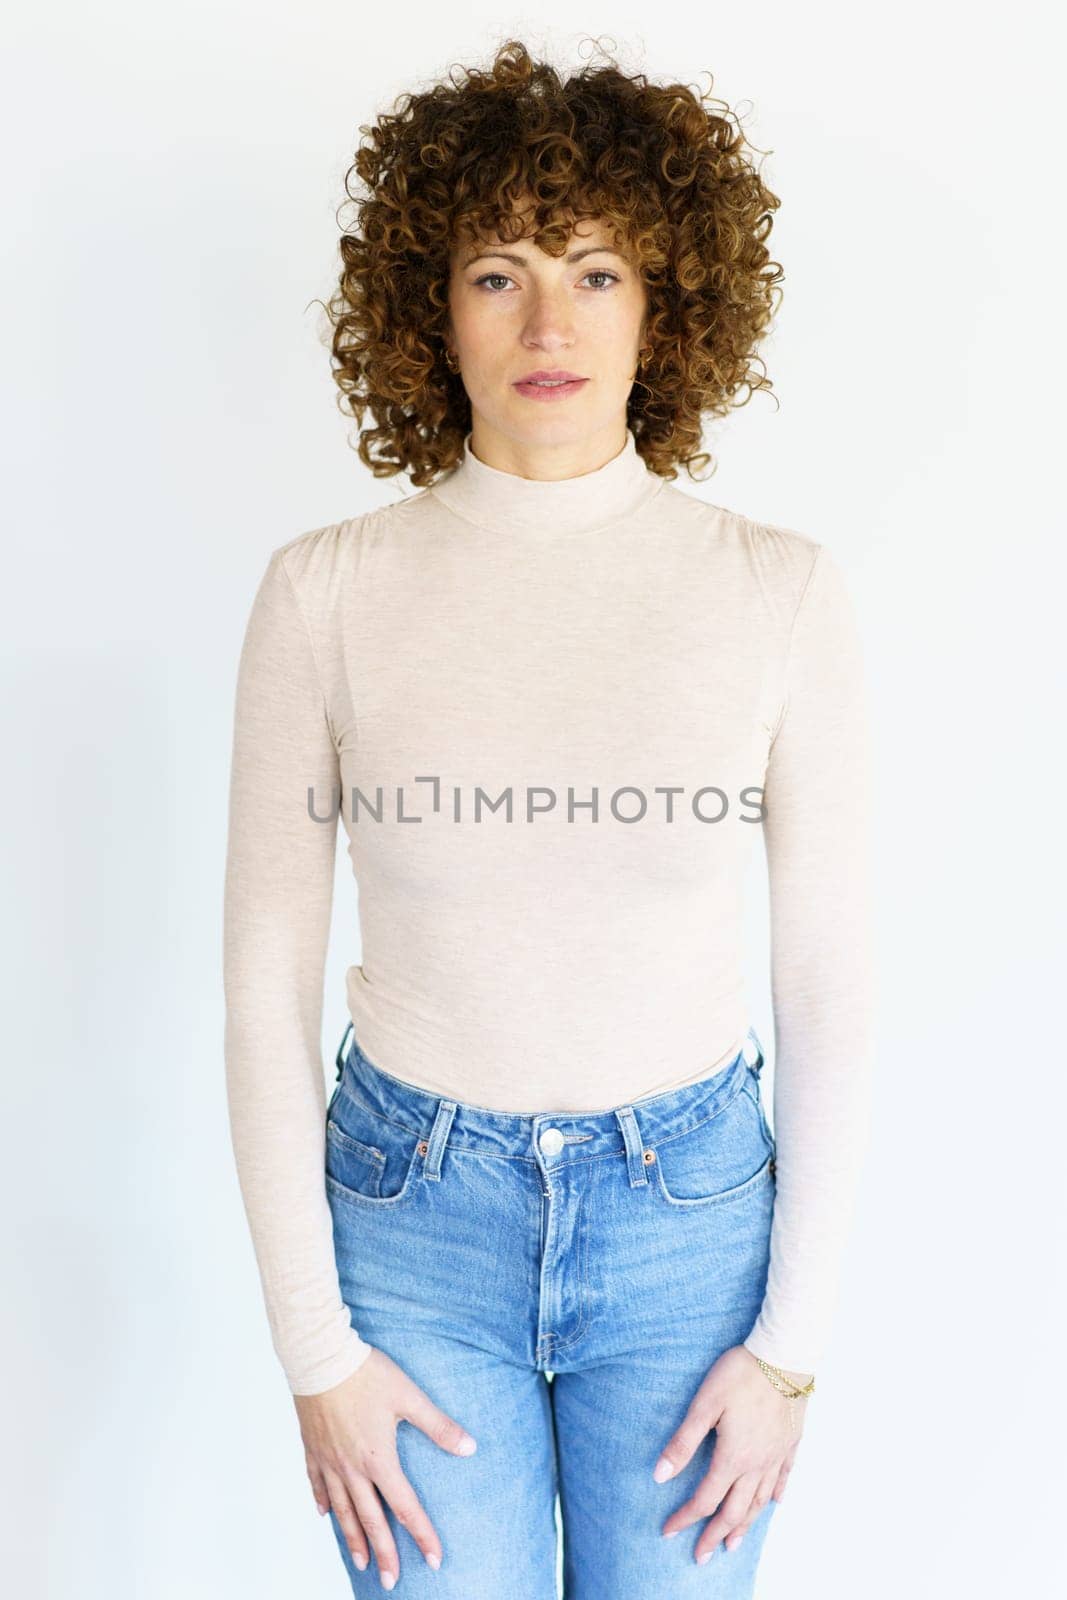 Curly haired woman standing against white background by javiindy